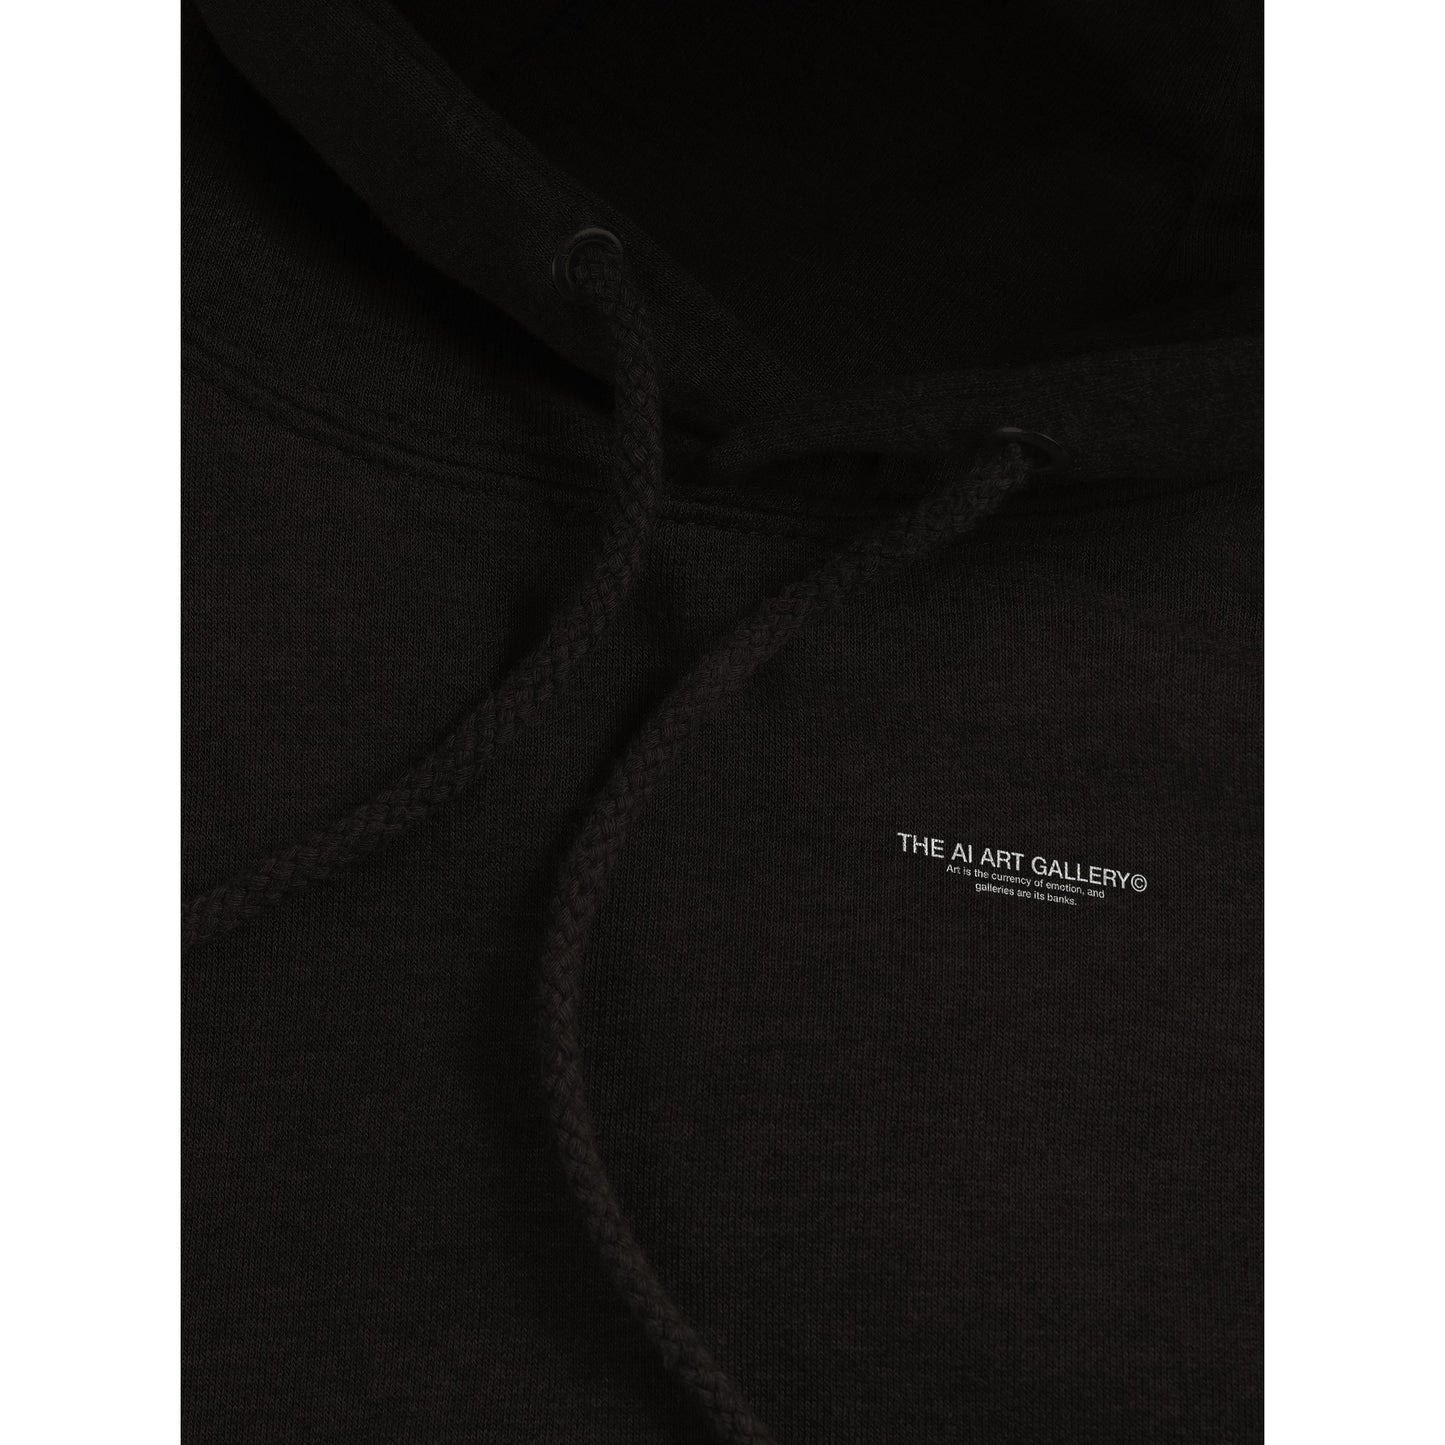 distortion / Gallery Staff Collection / Hoodie / black